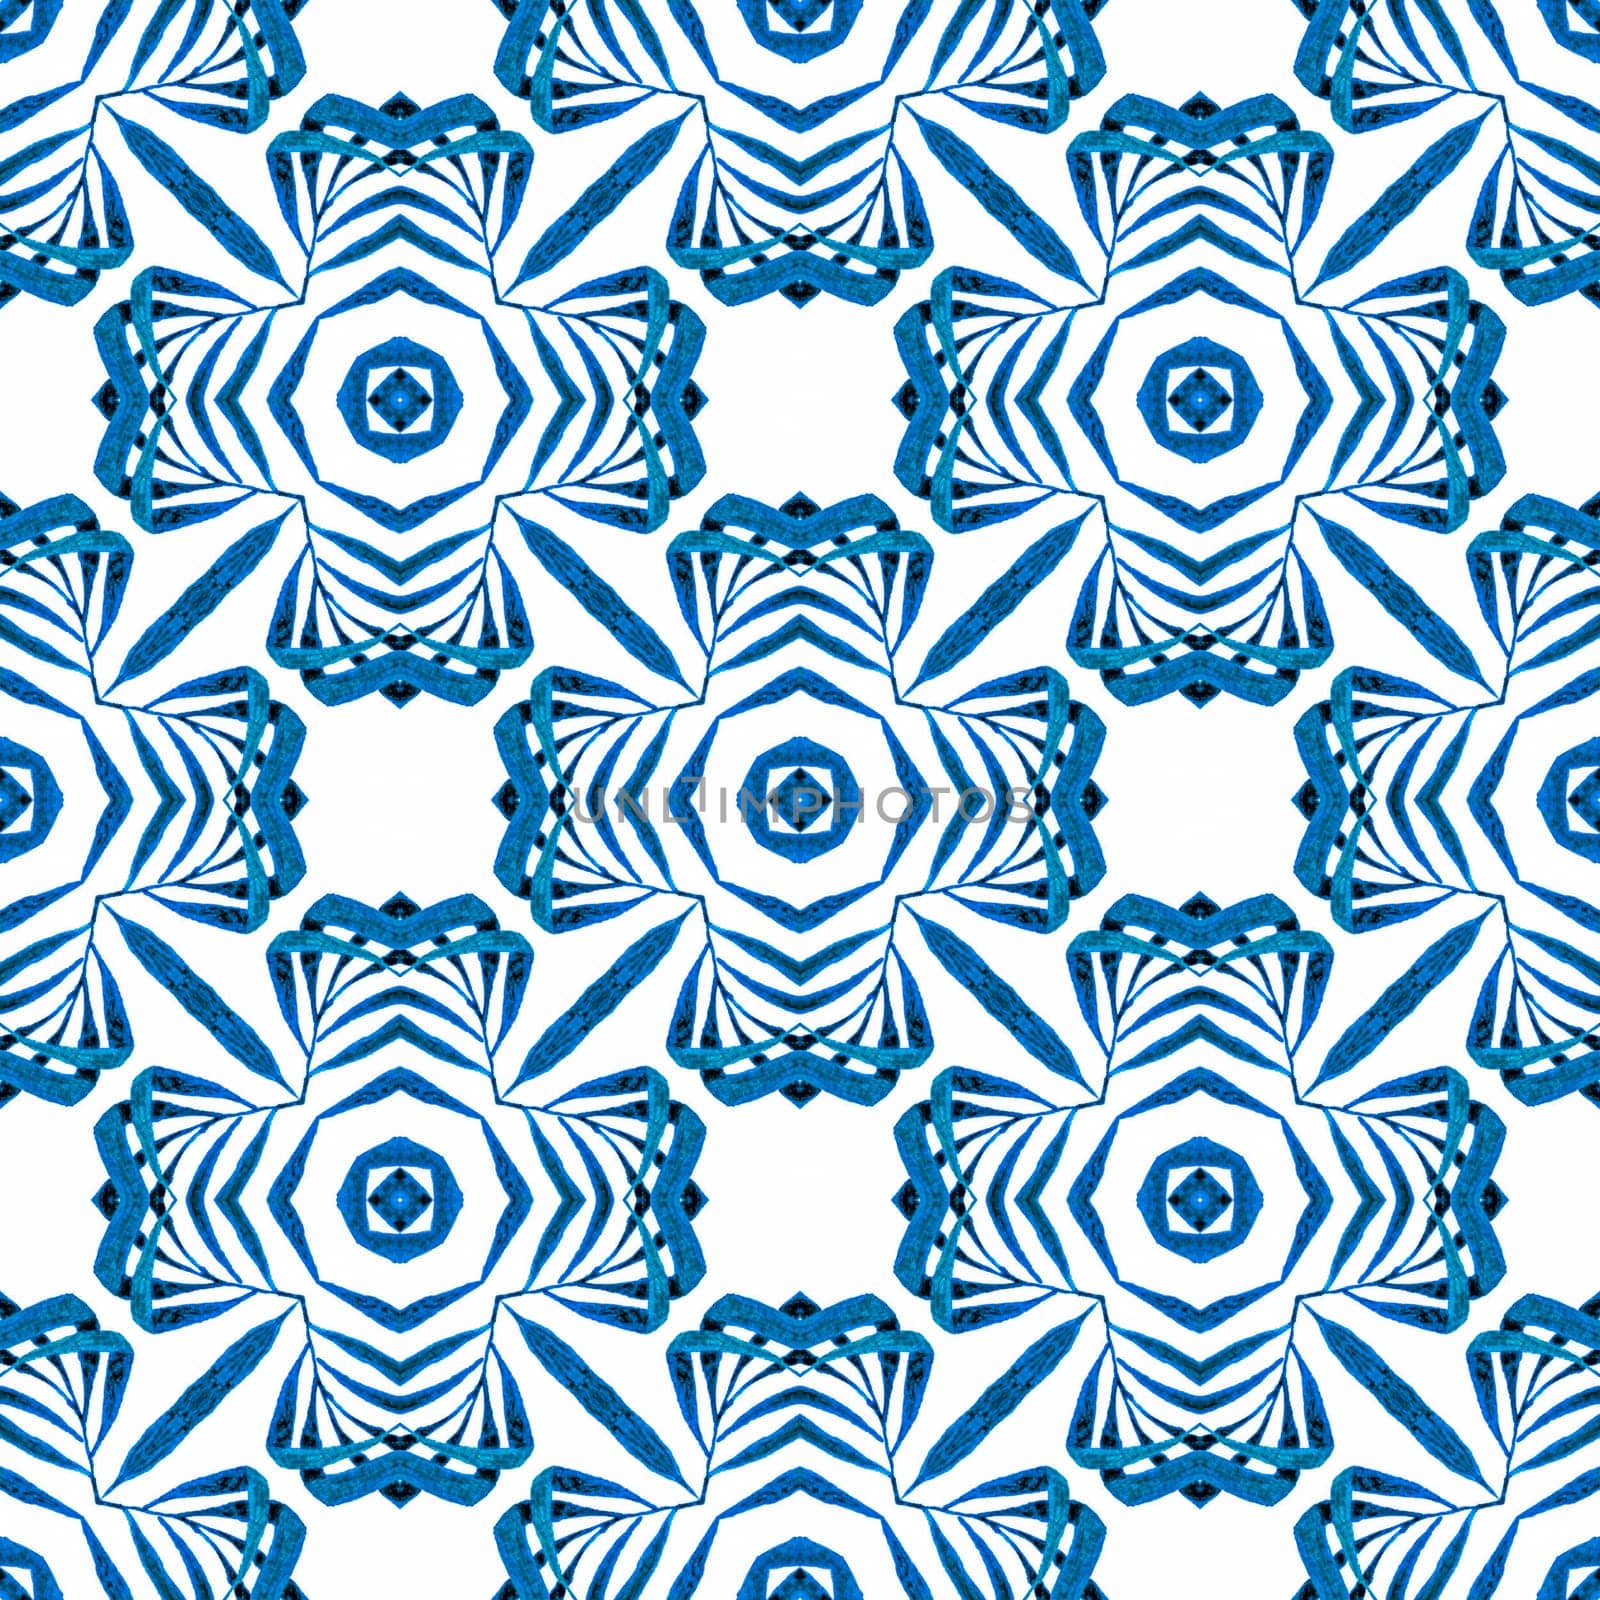 Watercolor summer ethnic border pattern. Blue fantastic boho chic summer design. Textile ready pleasant print, swimwear fabric, wallpaper, wrapping. Ethnic hand painted pattern.